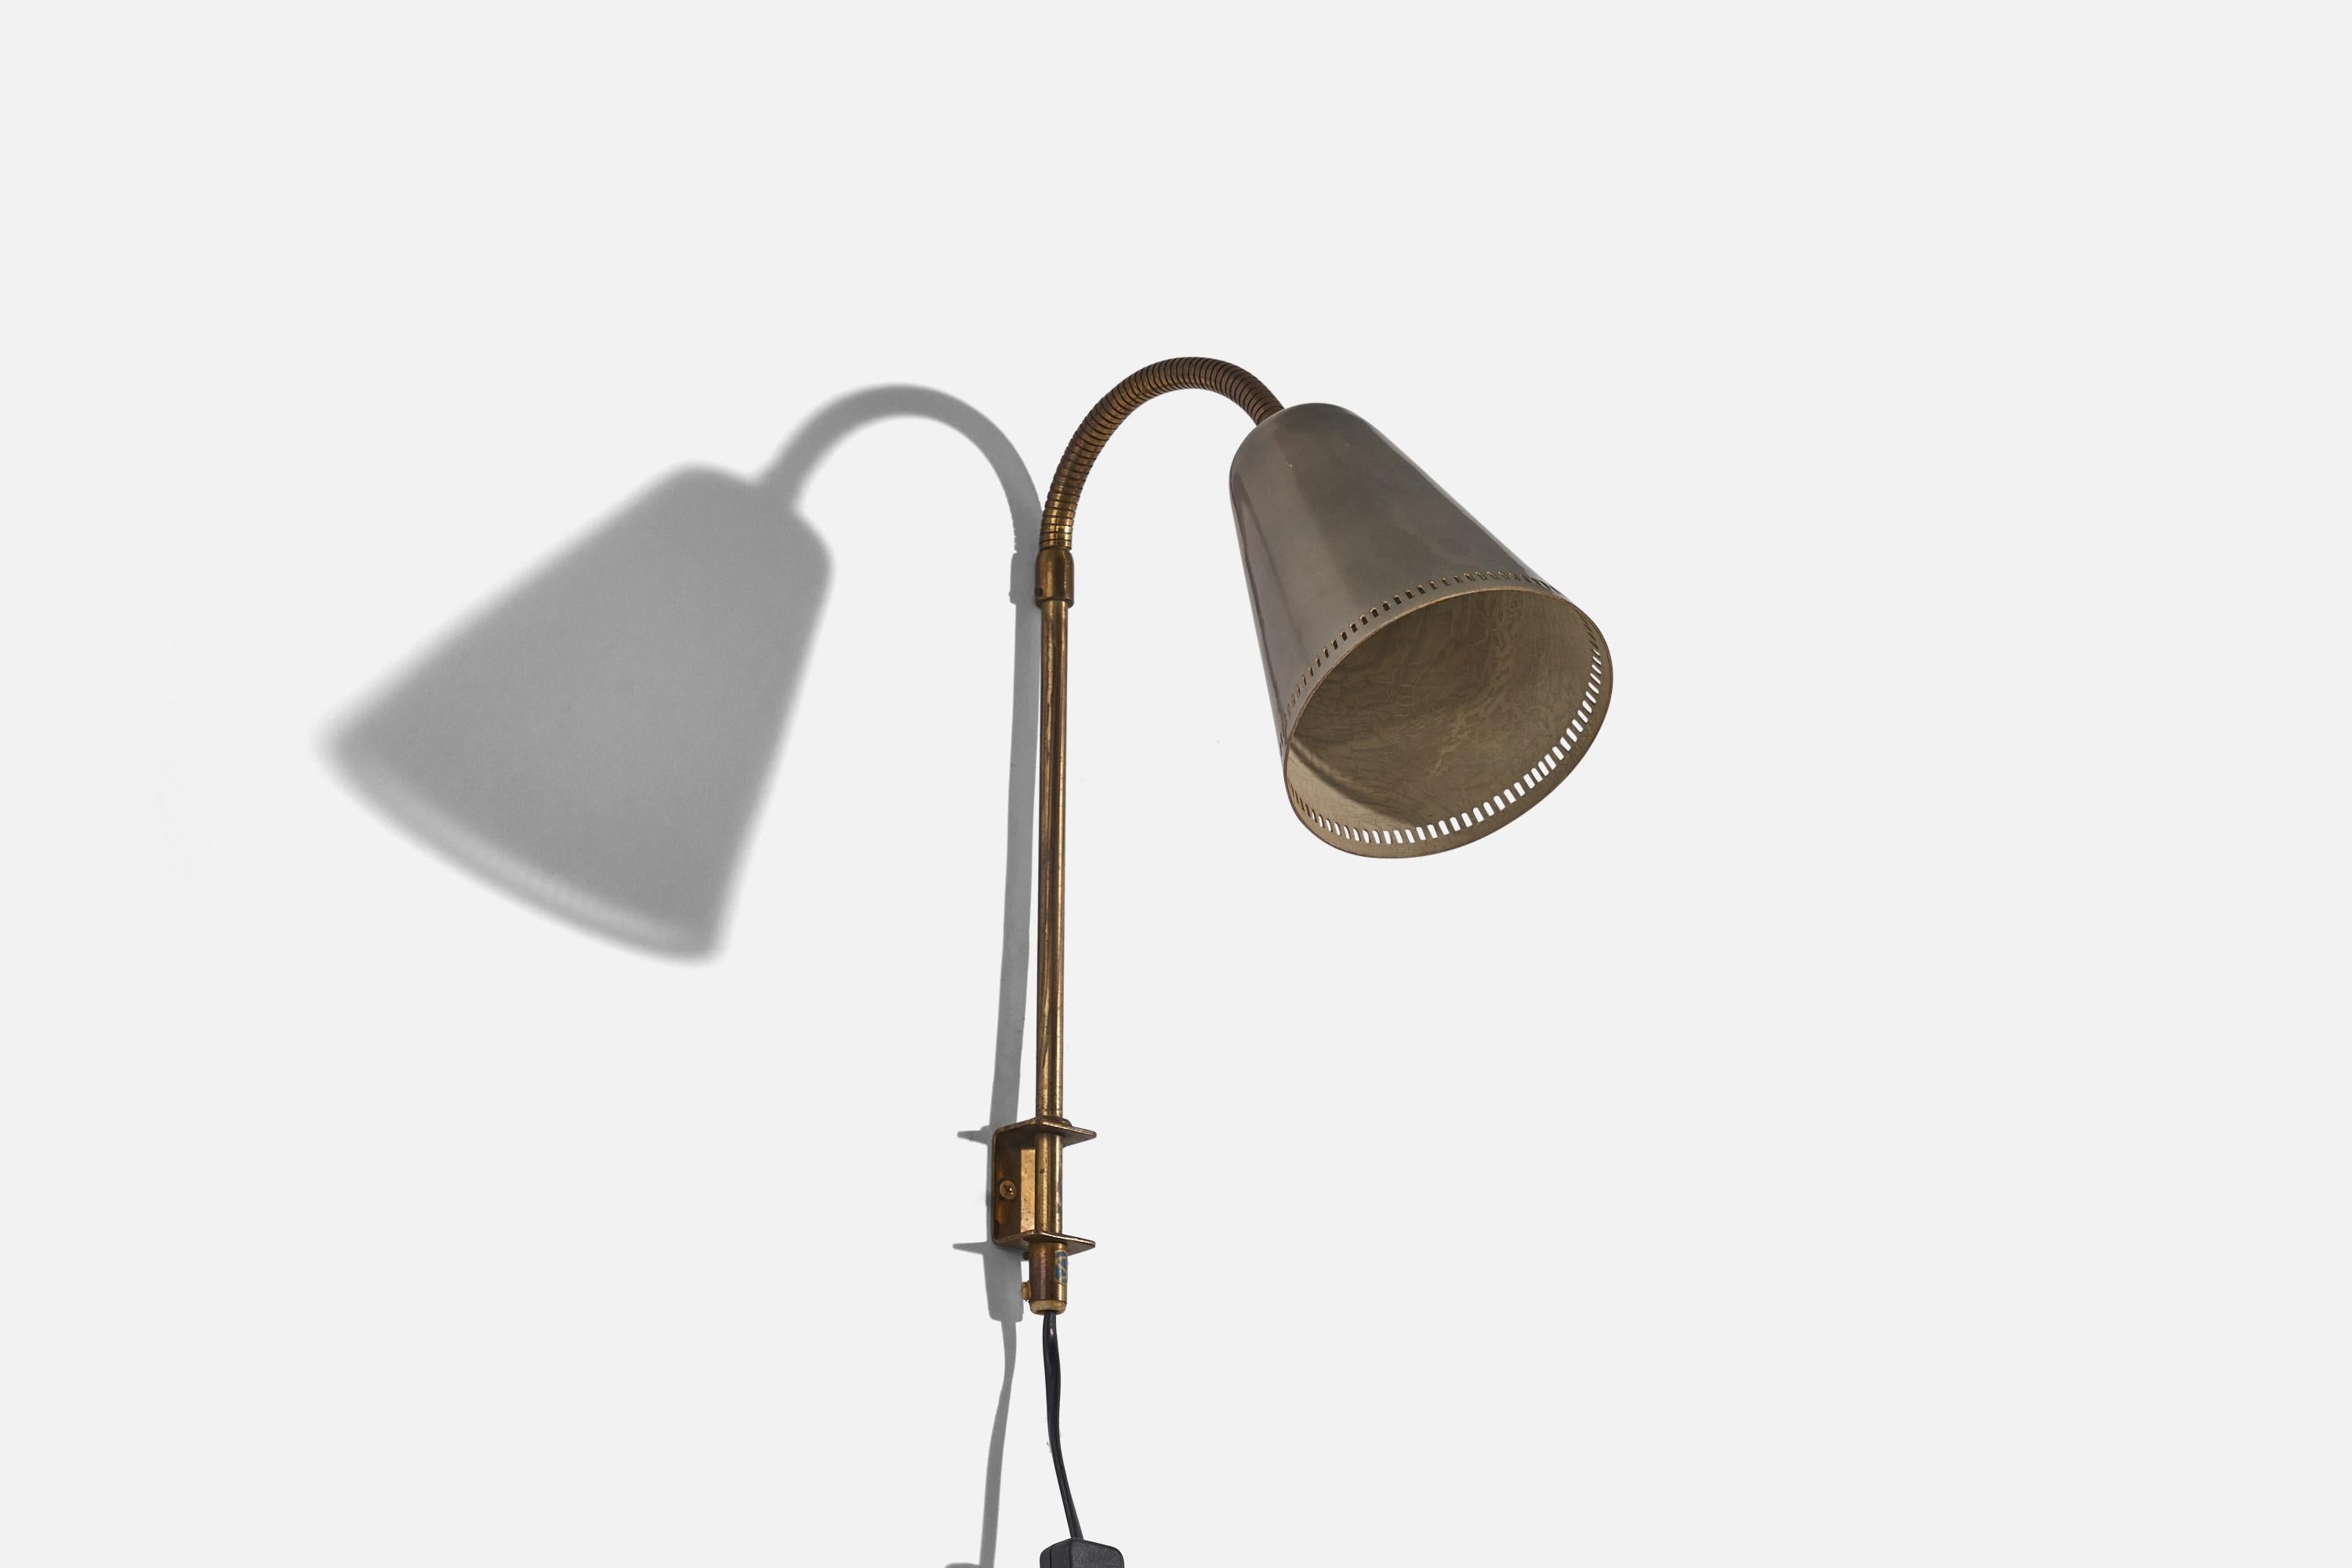 A brass and lacquered metal wall light designed and produced in Sweden, c. 1940s.

Variable dimensions, measured as illustrated in the first image. 
Dimensions of back plate (inches) : 1.625 x 1.125 x 0.9375 (H x W x D).